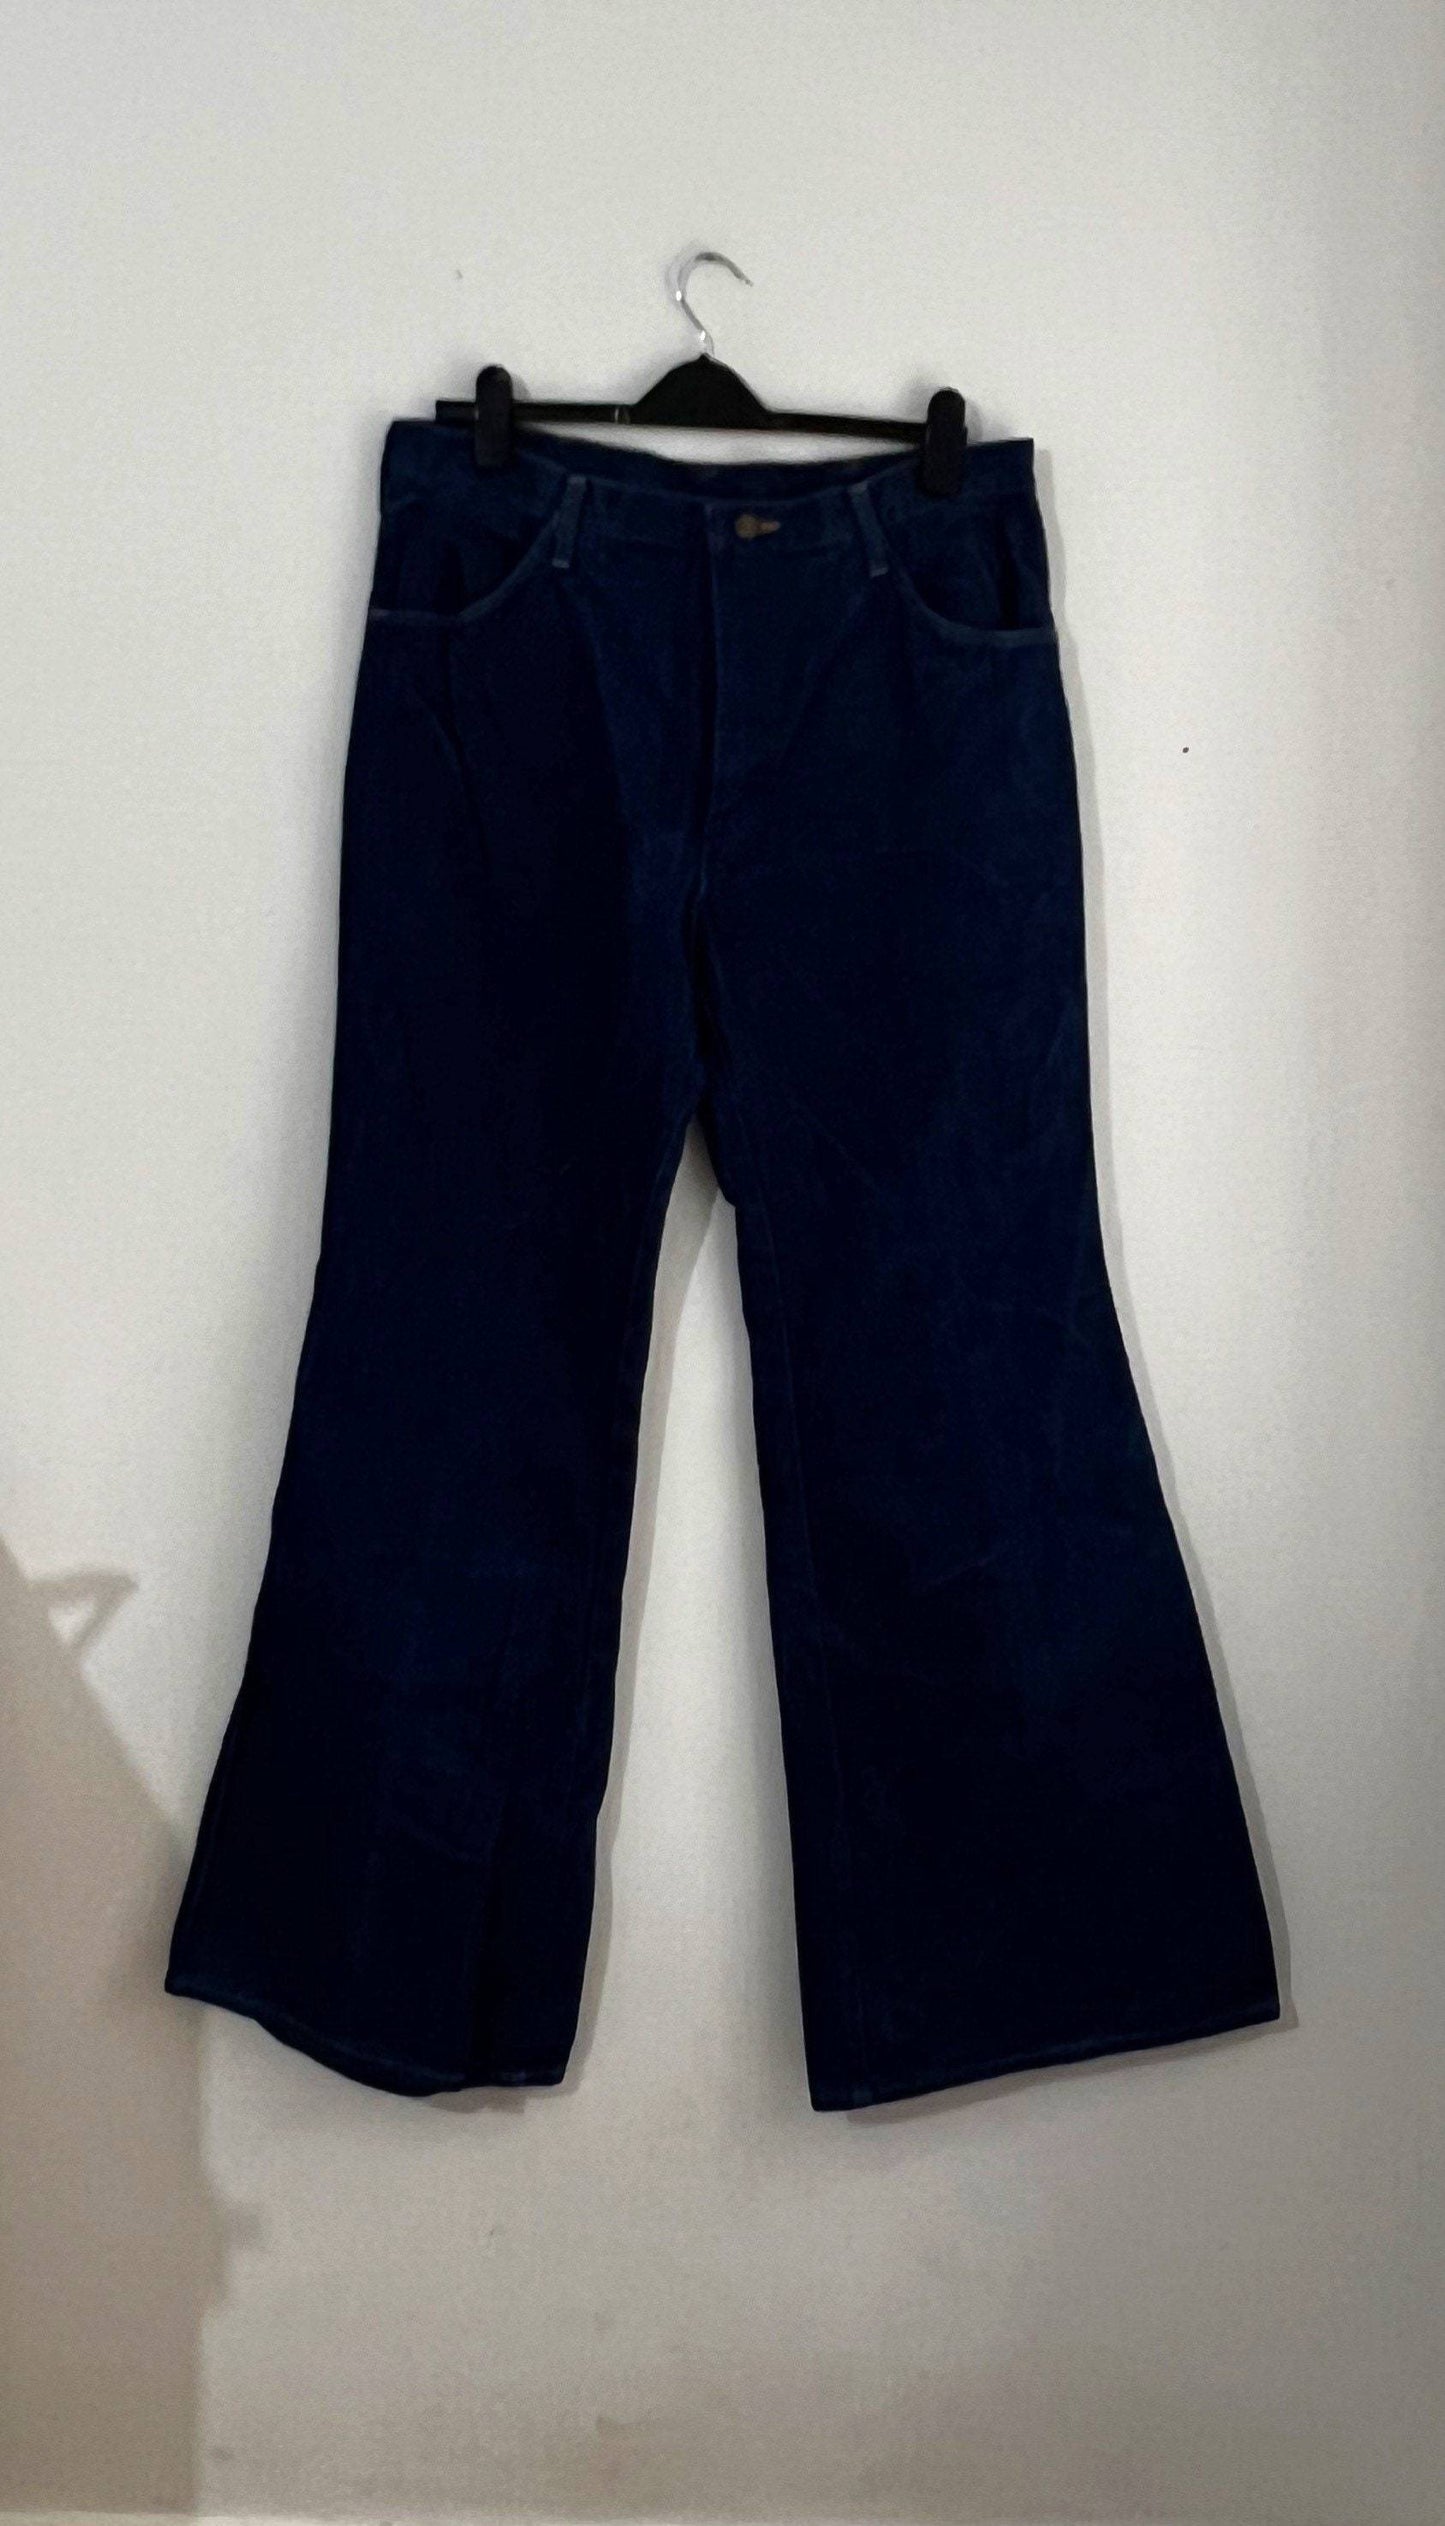 Vintage Wrangler Jeans Vintage Wrangler Jeans W38 L32 Blue UK Size 16 Pretty Vintage - Hand Curated Vintage